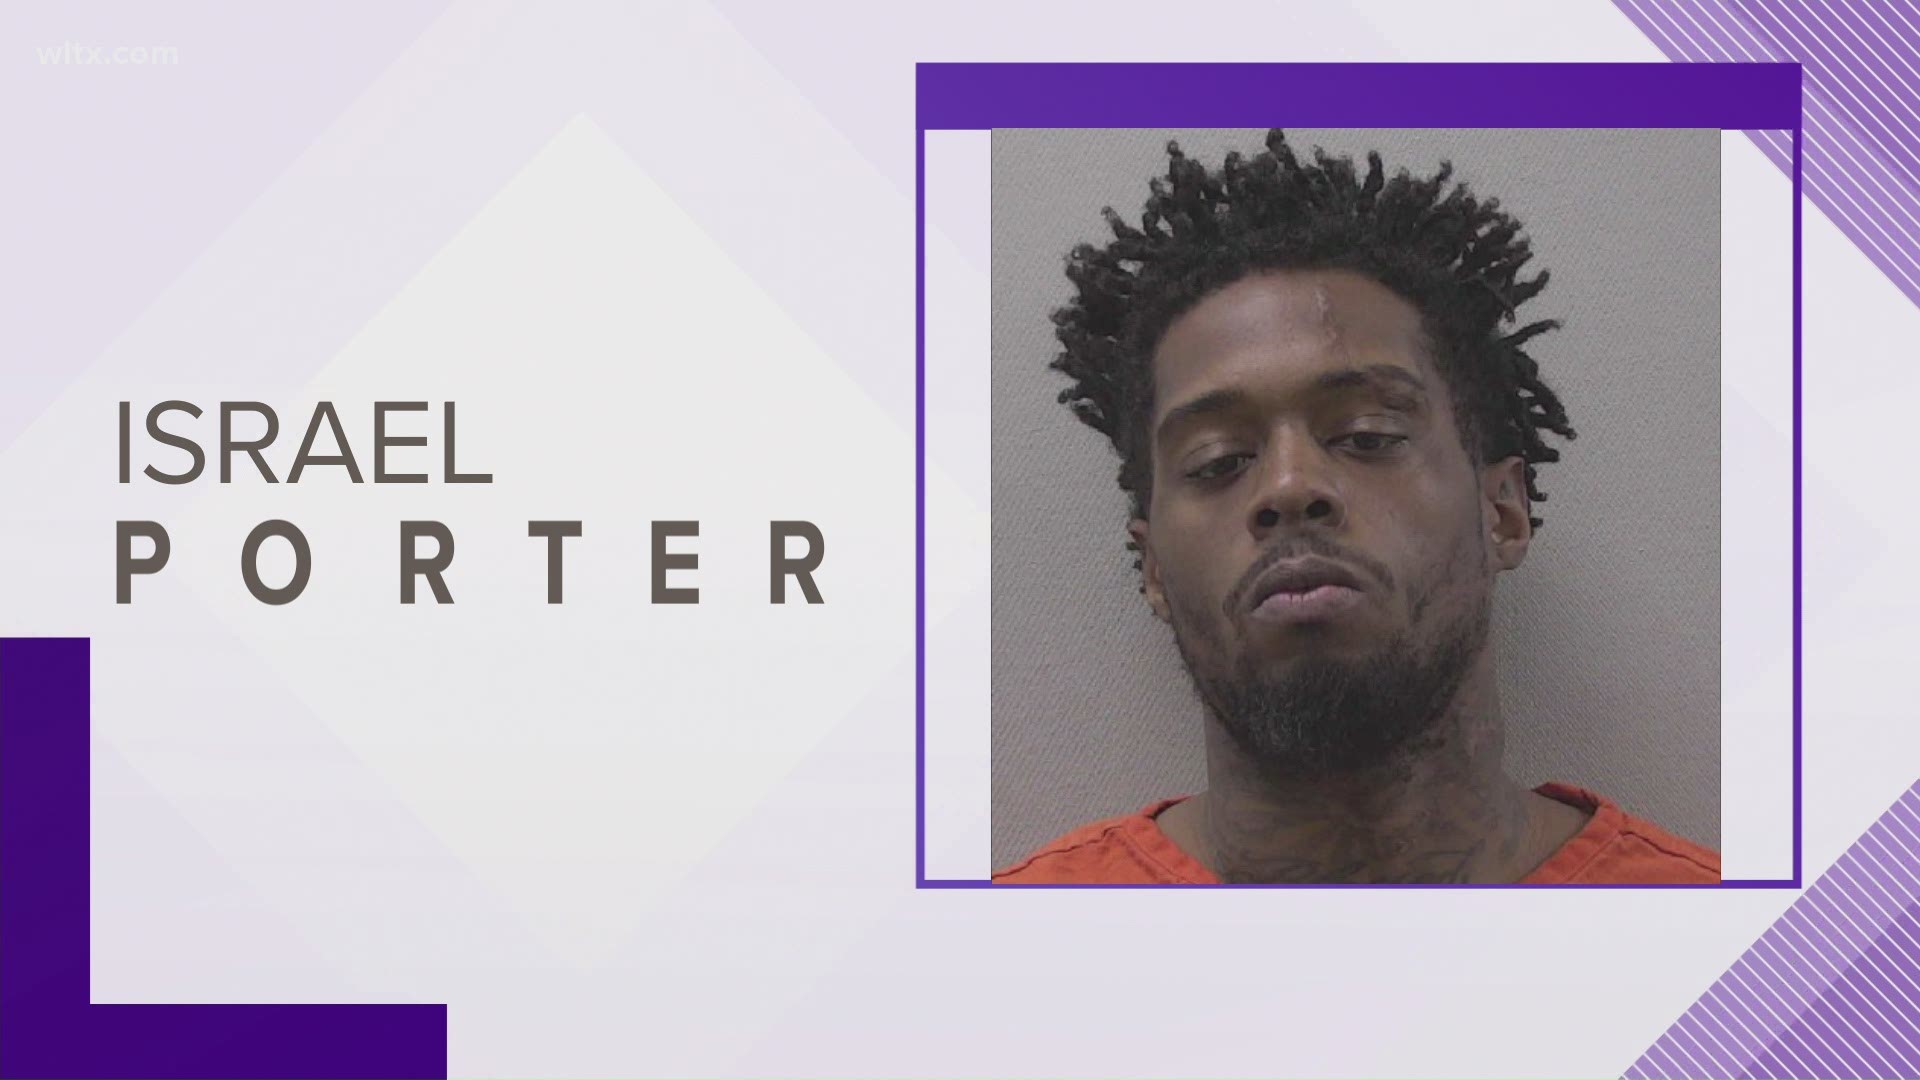 Israel Porter is charged with shooting and killing two men in Cayce back in August.